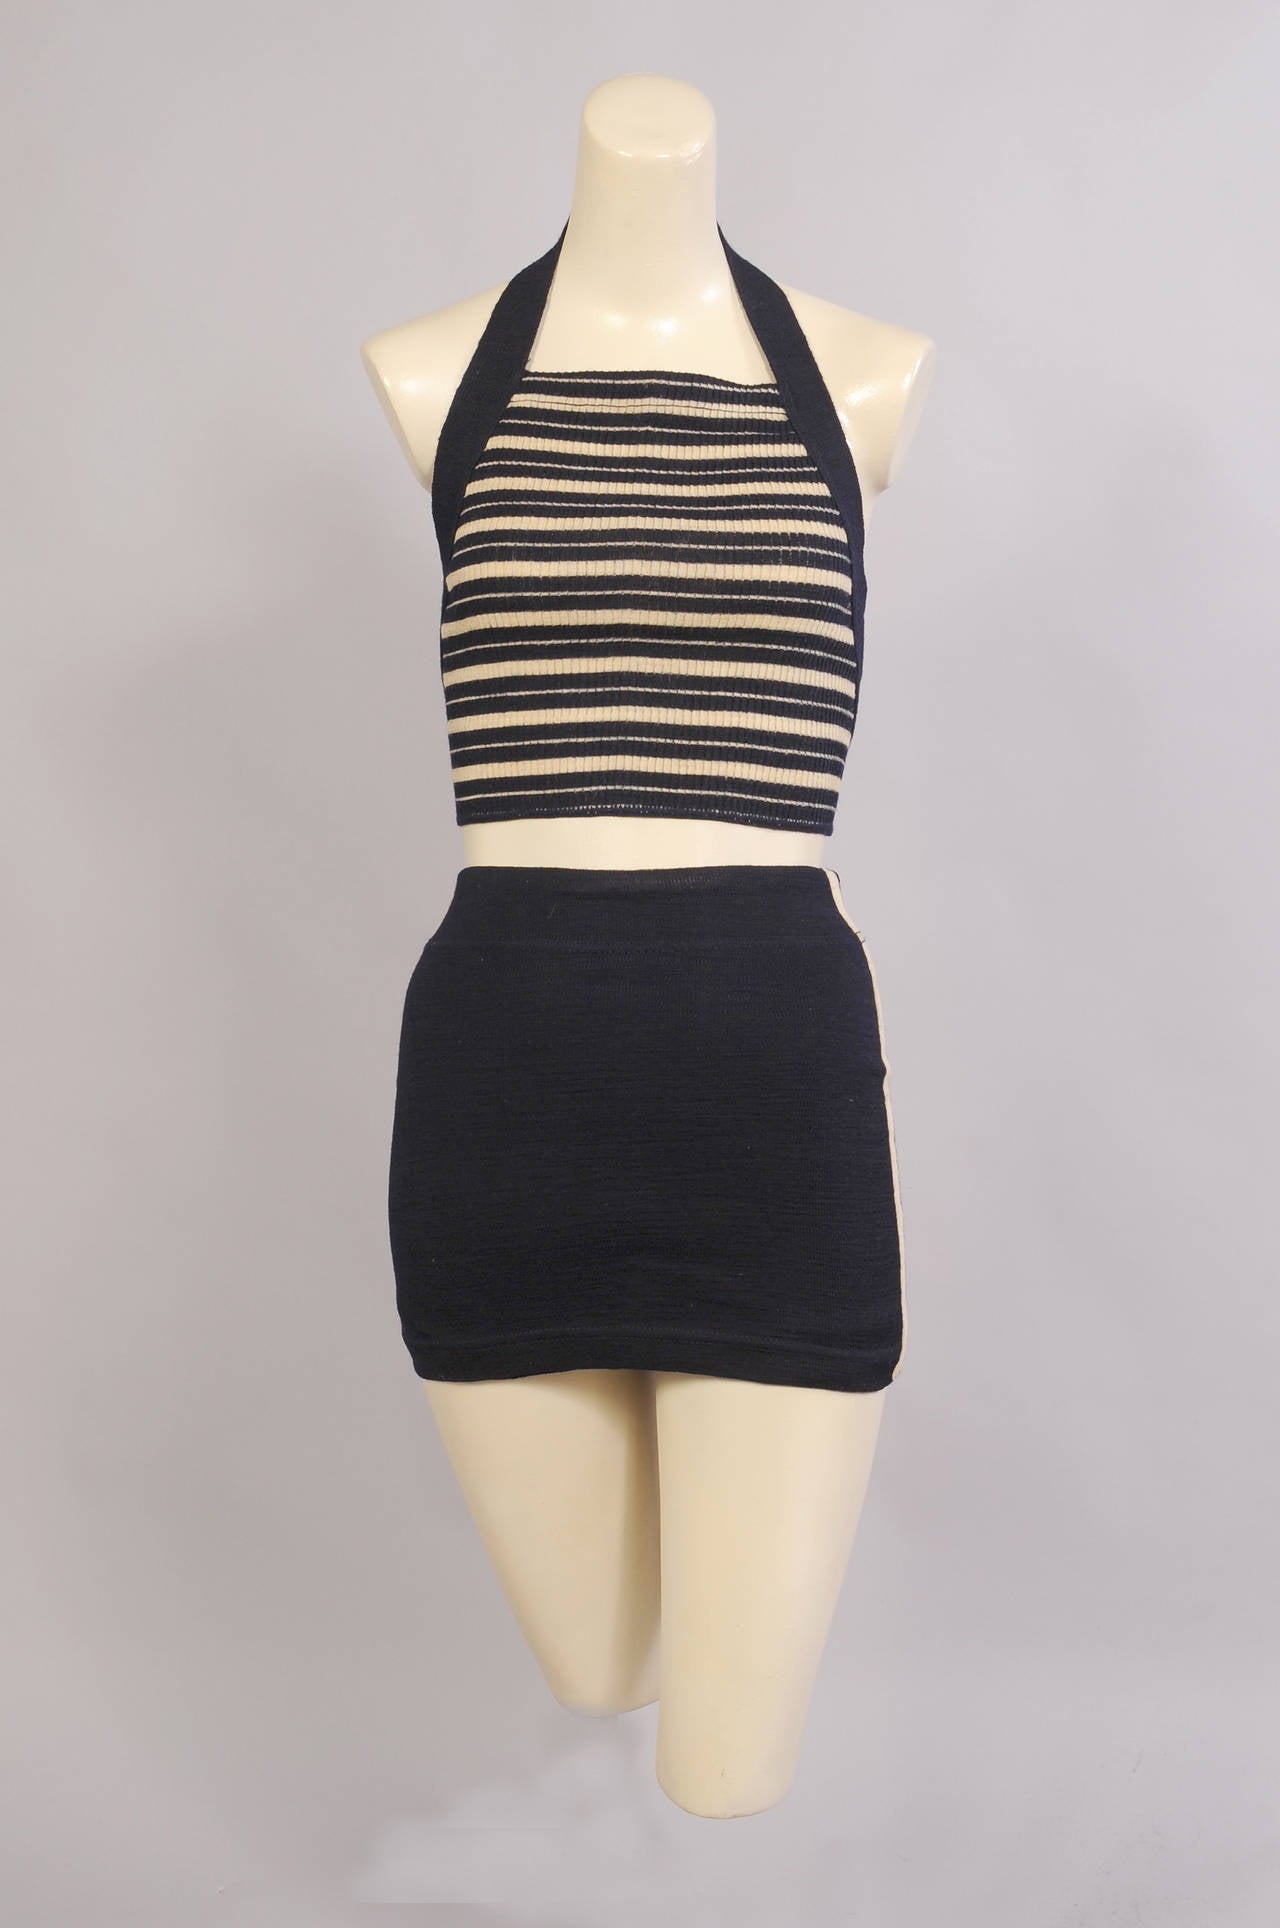 A fabulous survivor from the Roaring 20's this navy blue and cream bathing suit is in excellent condition. The bare midriff top has a striped front bordered in solid navy. It ties in back at the halter neckline and the waist. The bottoms have a